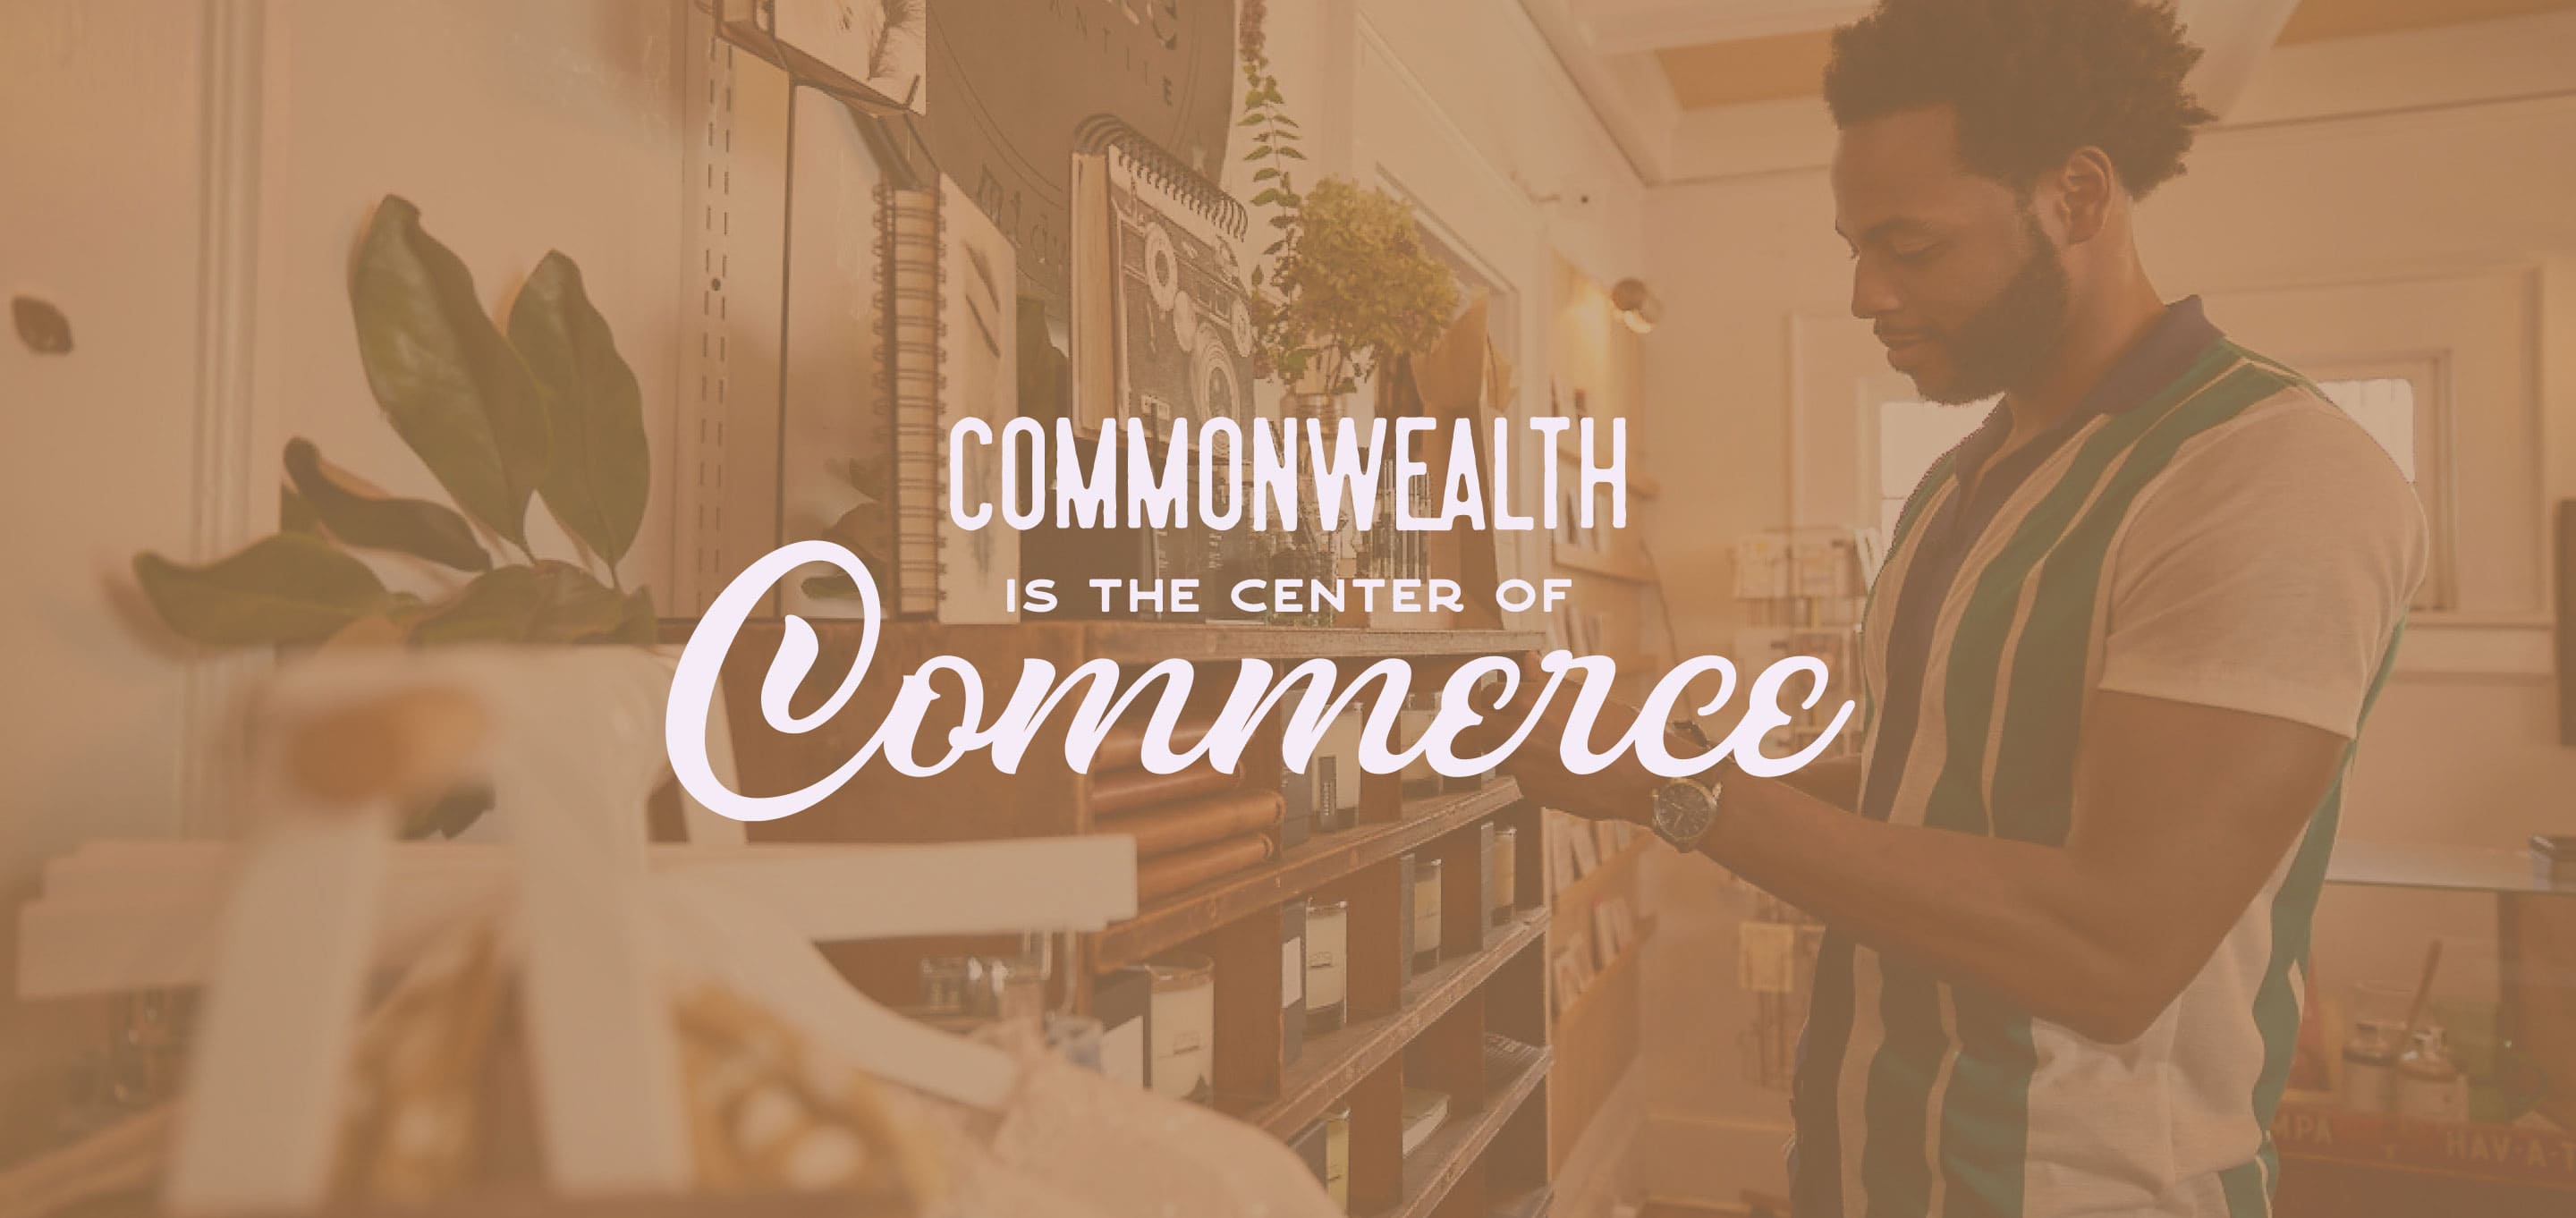 Promo for Commonwealth that says Commonwealth is the center of commerce